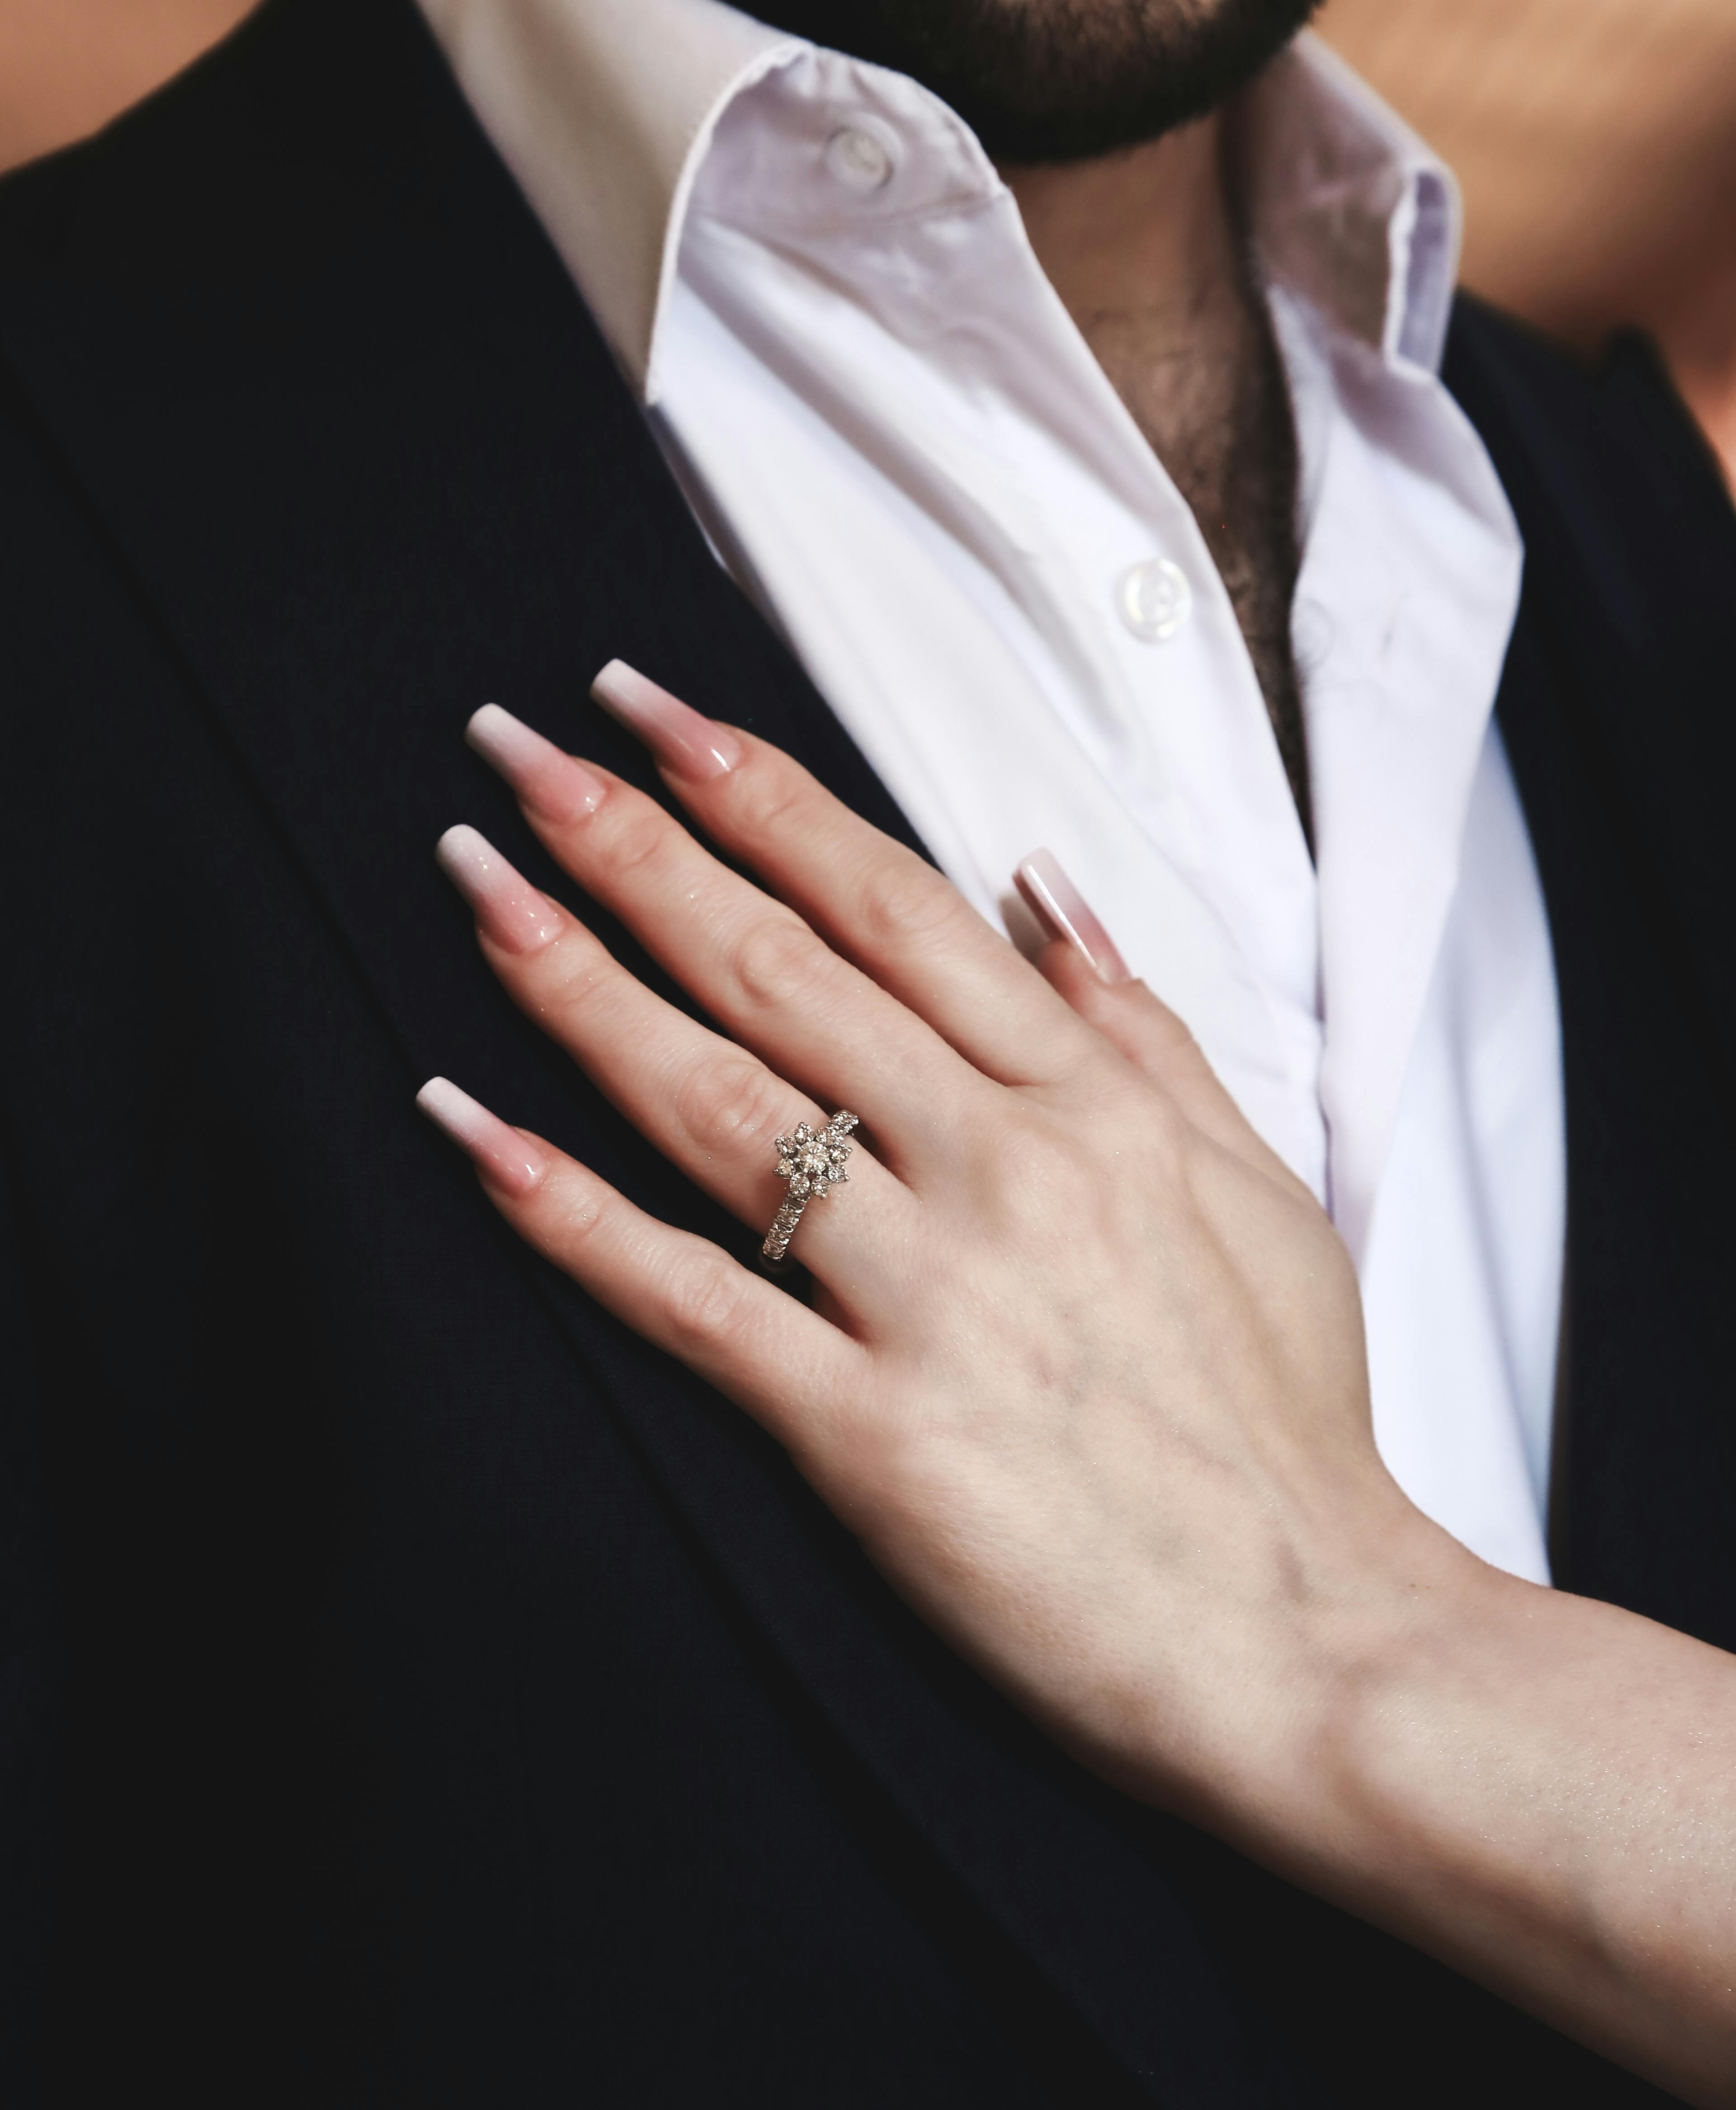 free photo of engagement ring on a womans hand resting on a man chest